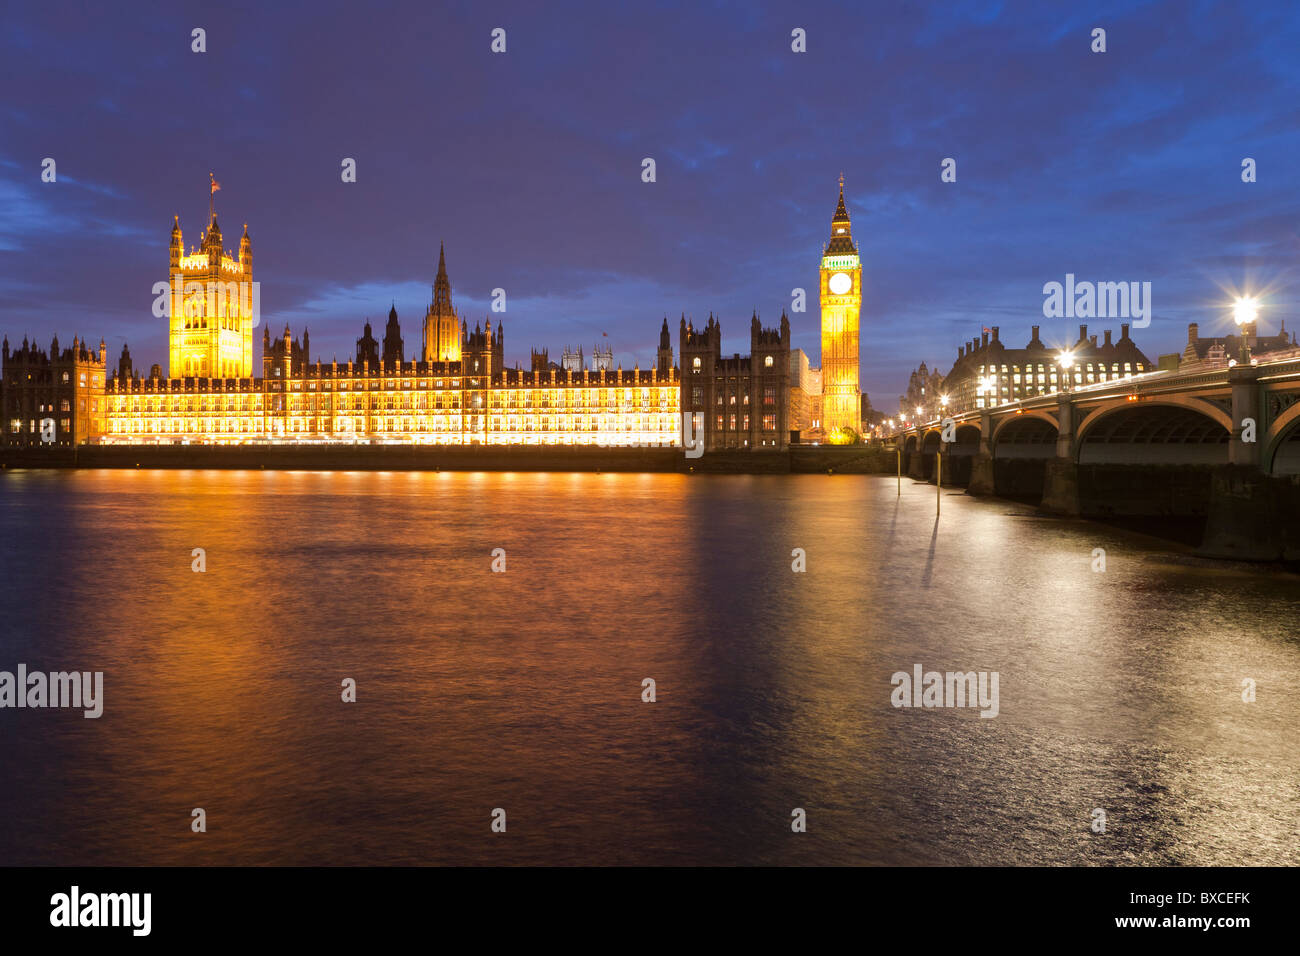 RIVER THAMES, HOUSES OF PARLIAMENT, BIG BEN, WESTMINSTER HALL, LONDON, ENGLAND, GREAT BRITAIN Stock Photo